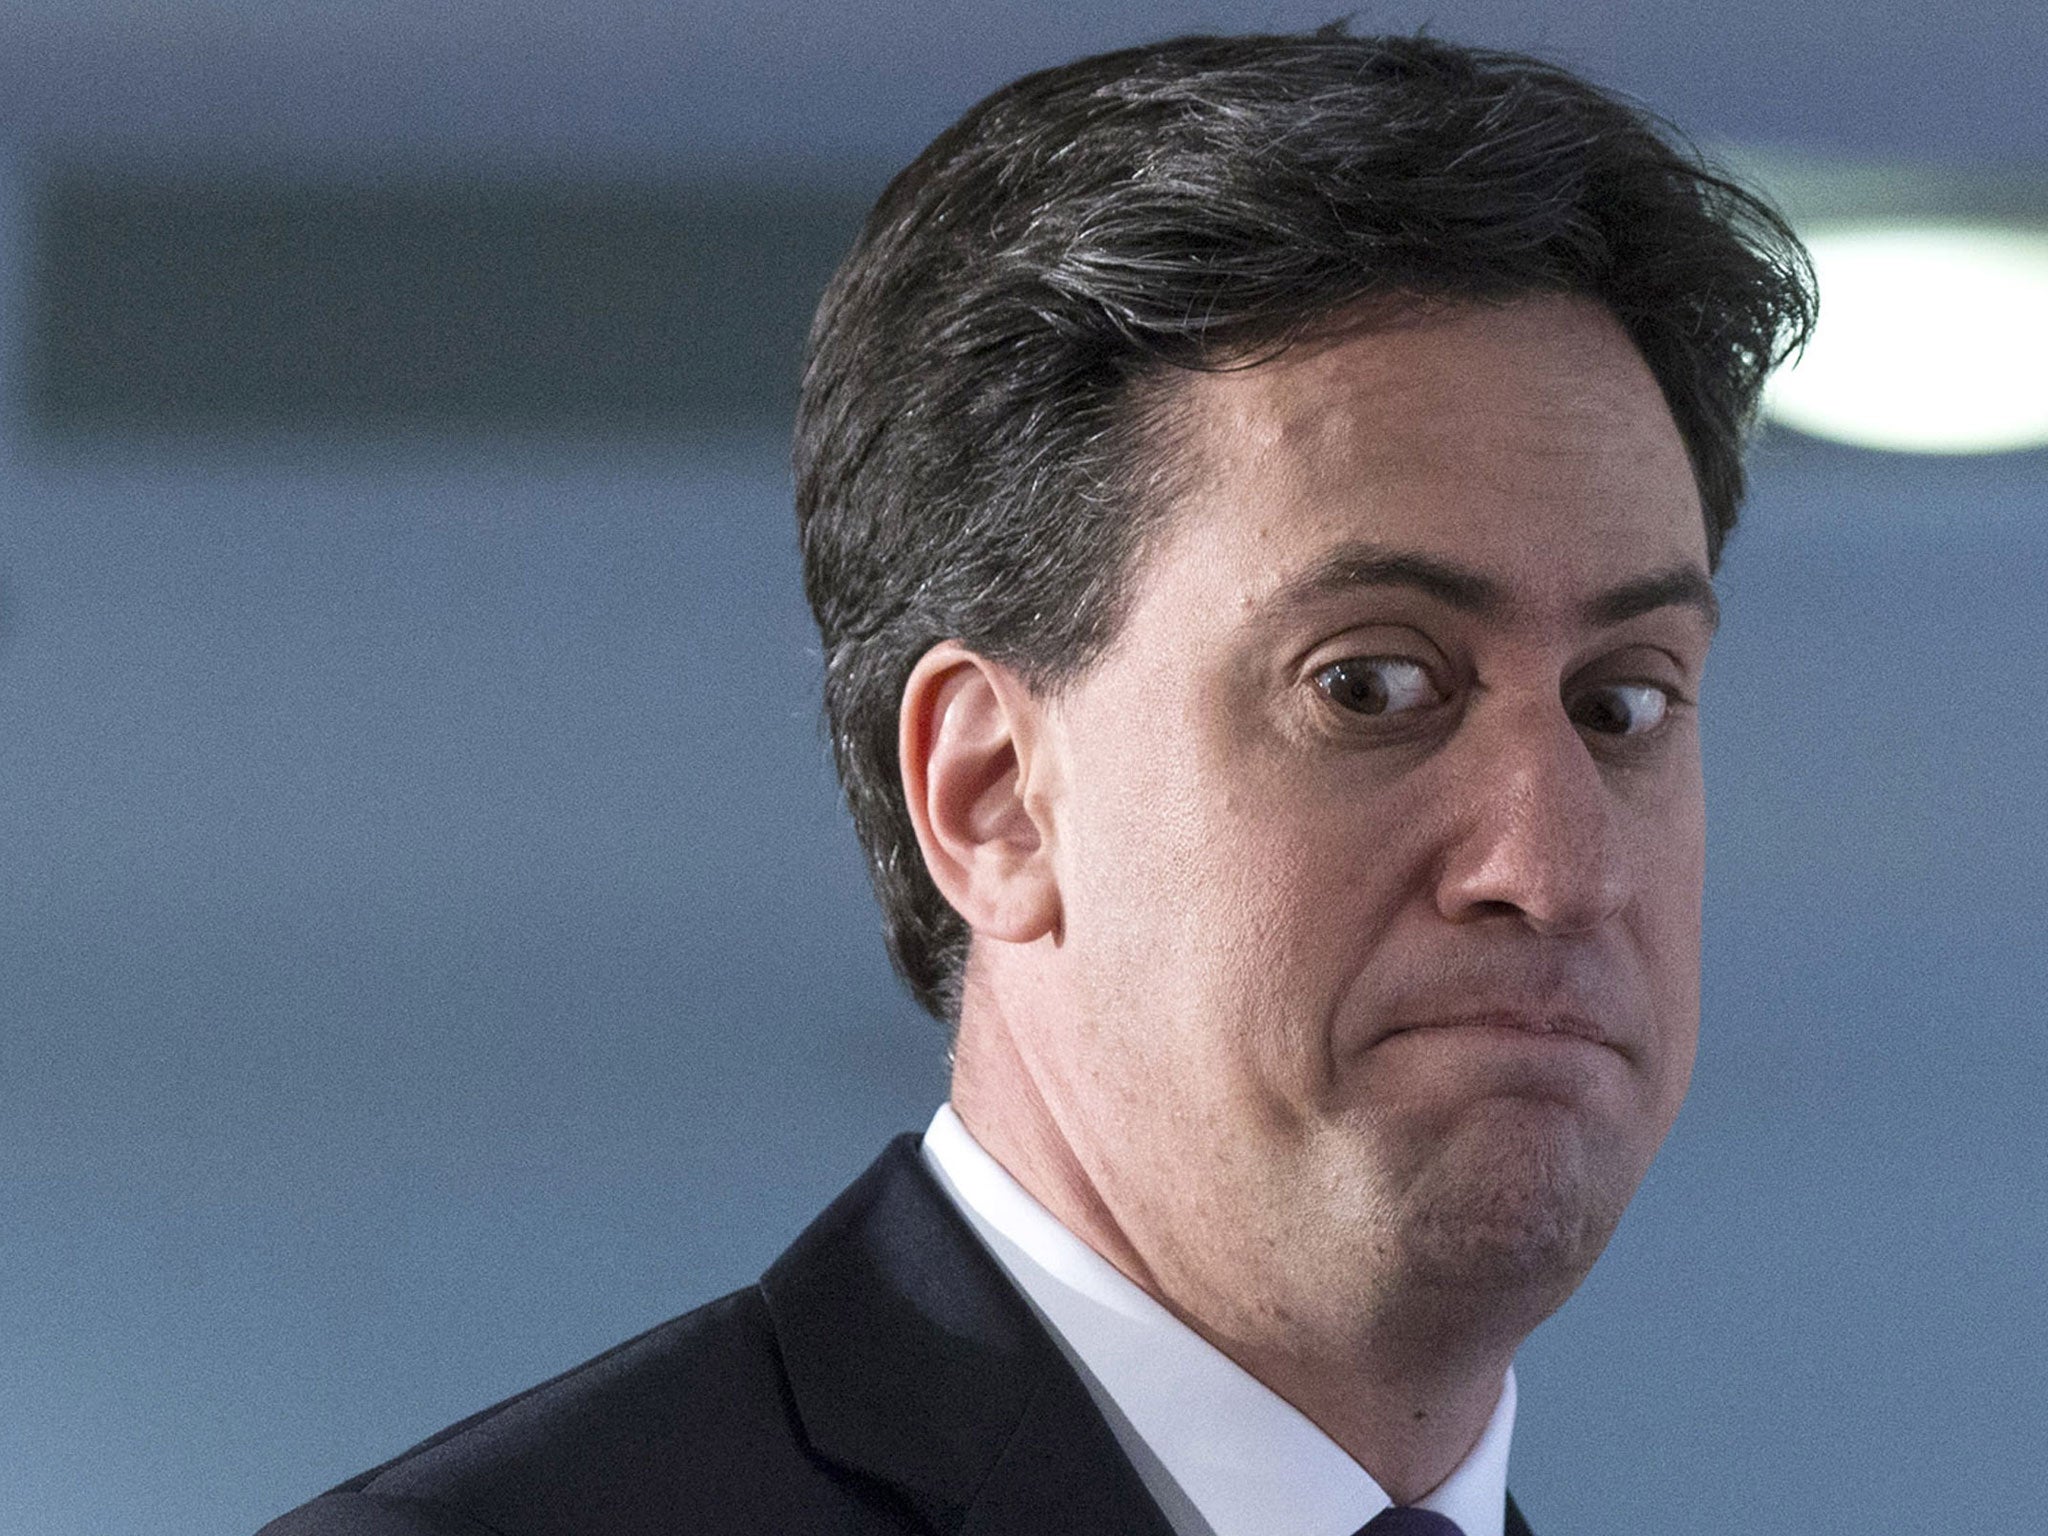 After the news that the Labour lead over the Conservatives has narrowed dramatically in recent days, and is down to just one point in three different polls, Ed Miliband is today facing another poll shocker after a new survey released showed four in ten vo